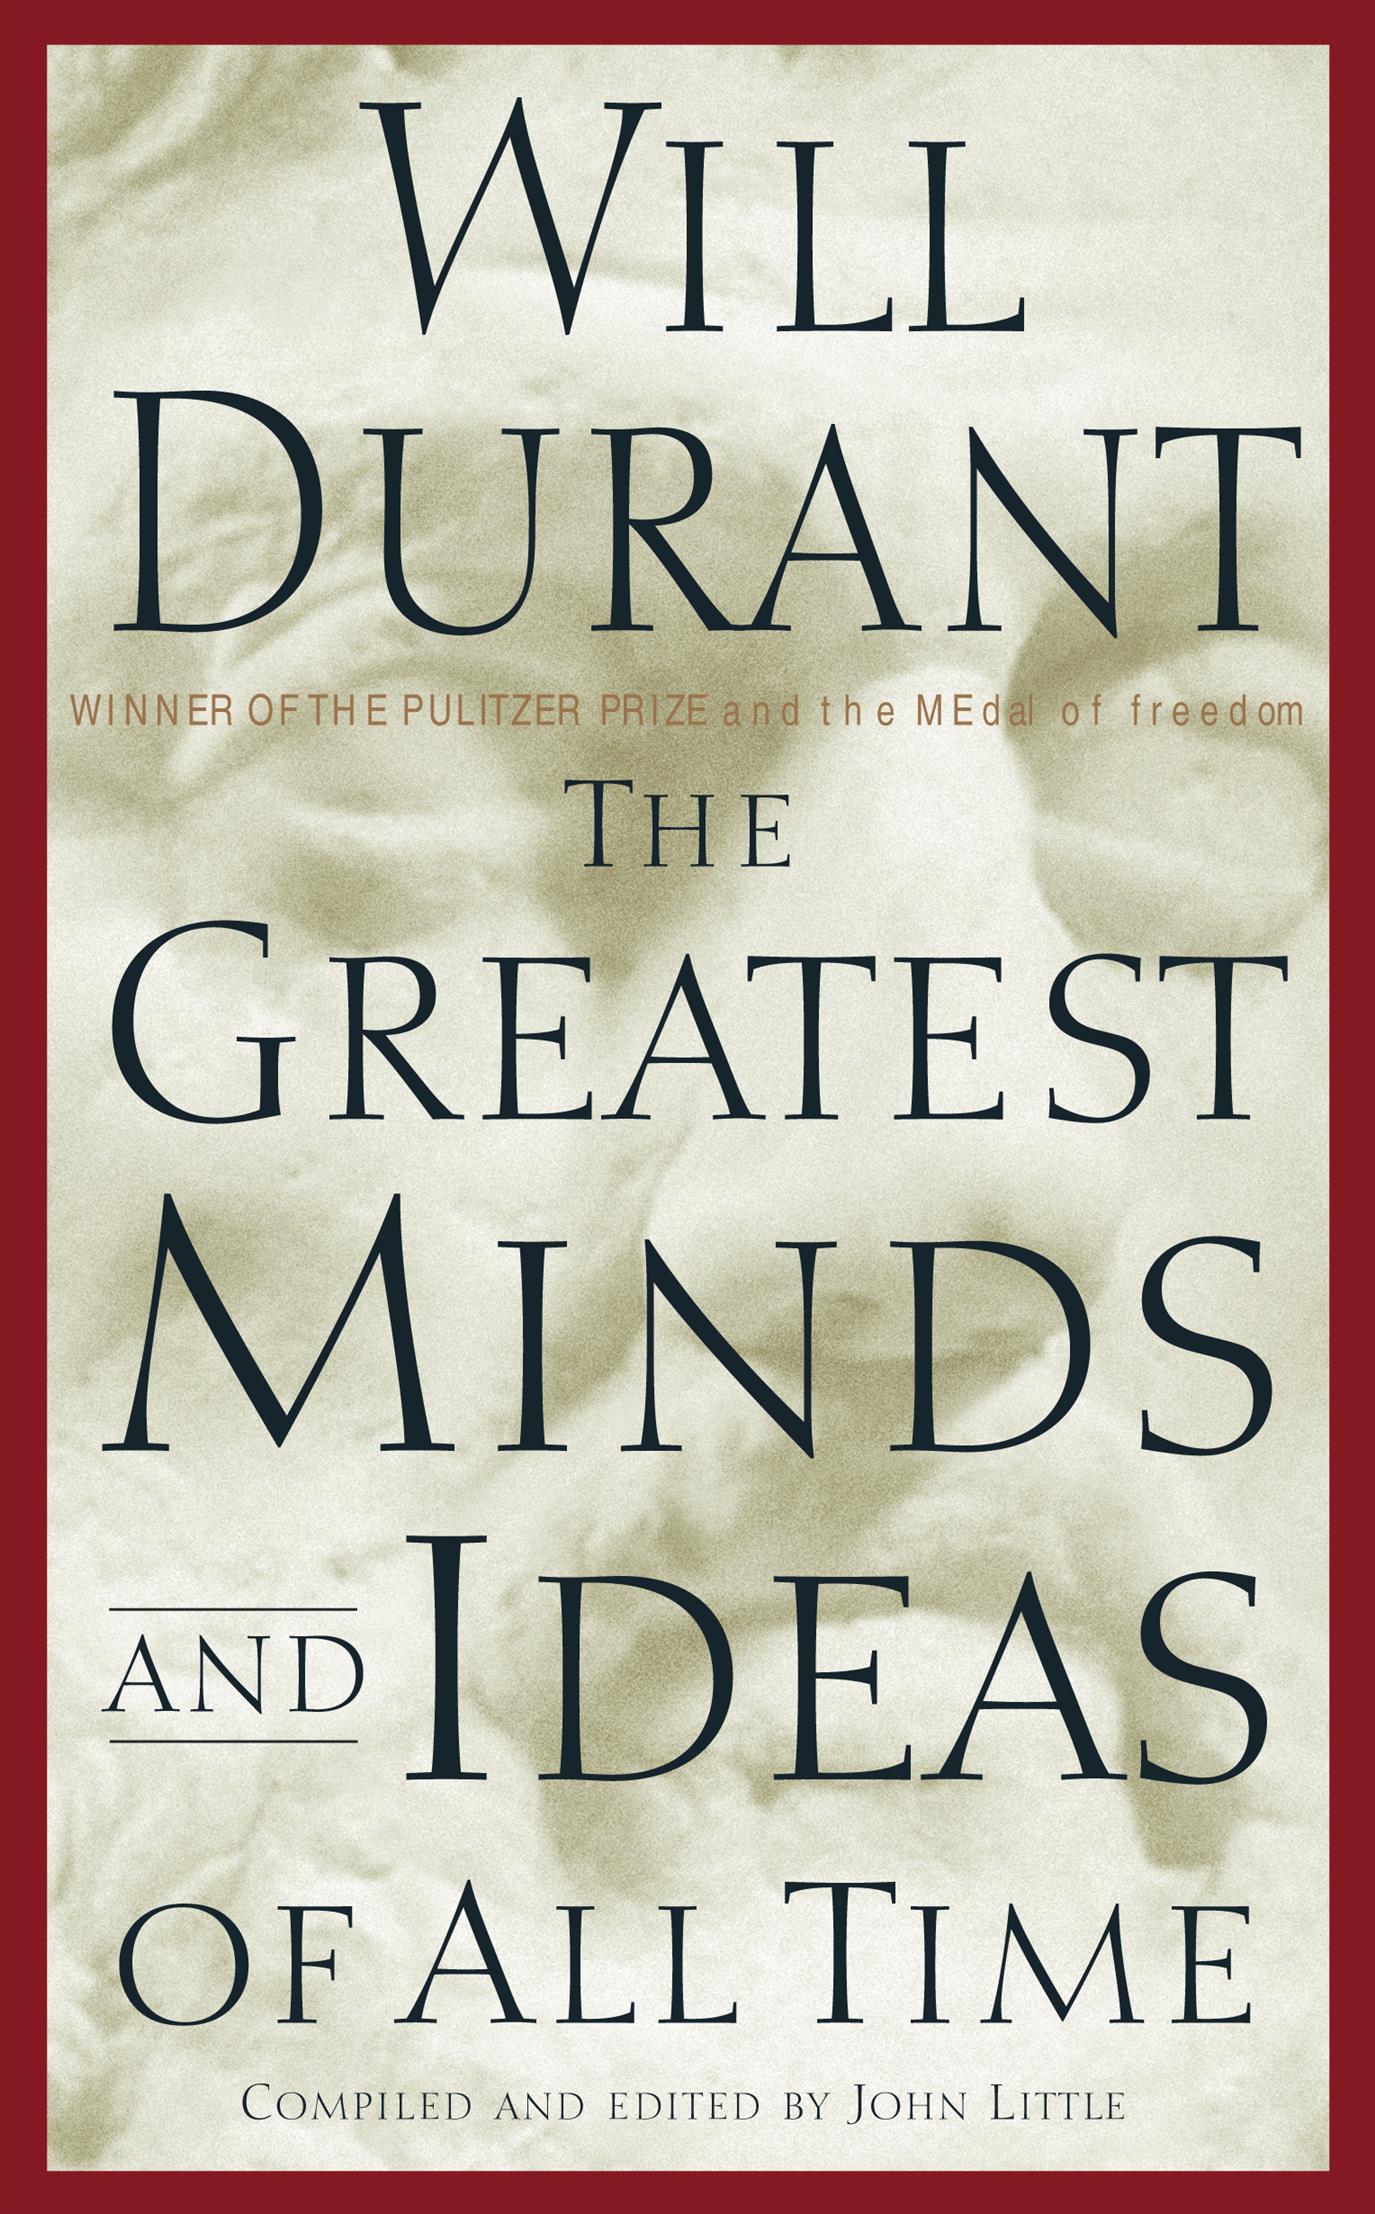 THE GREATEST MIND AND IDEAS 